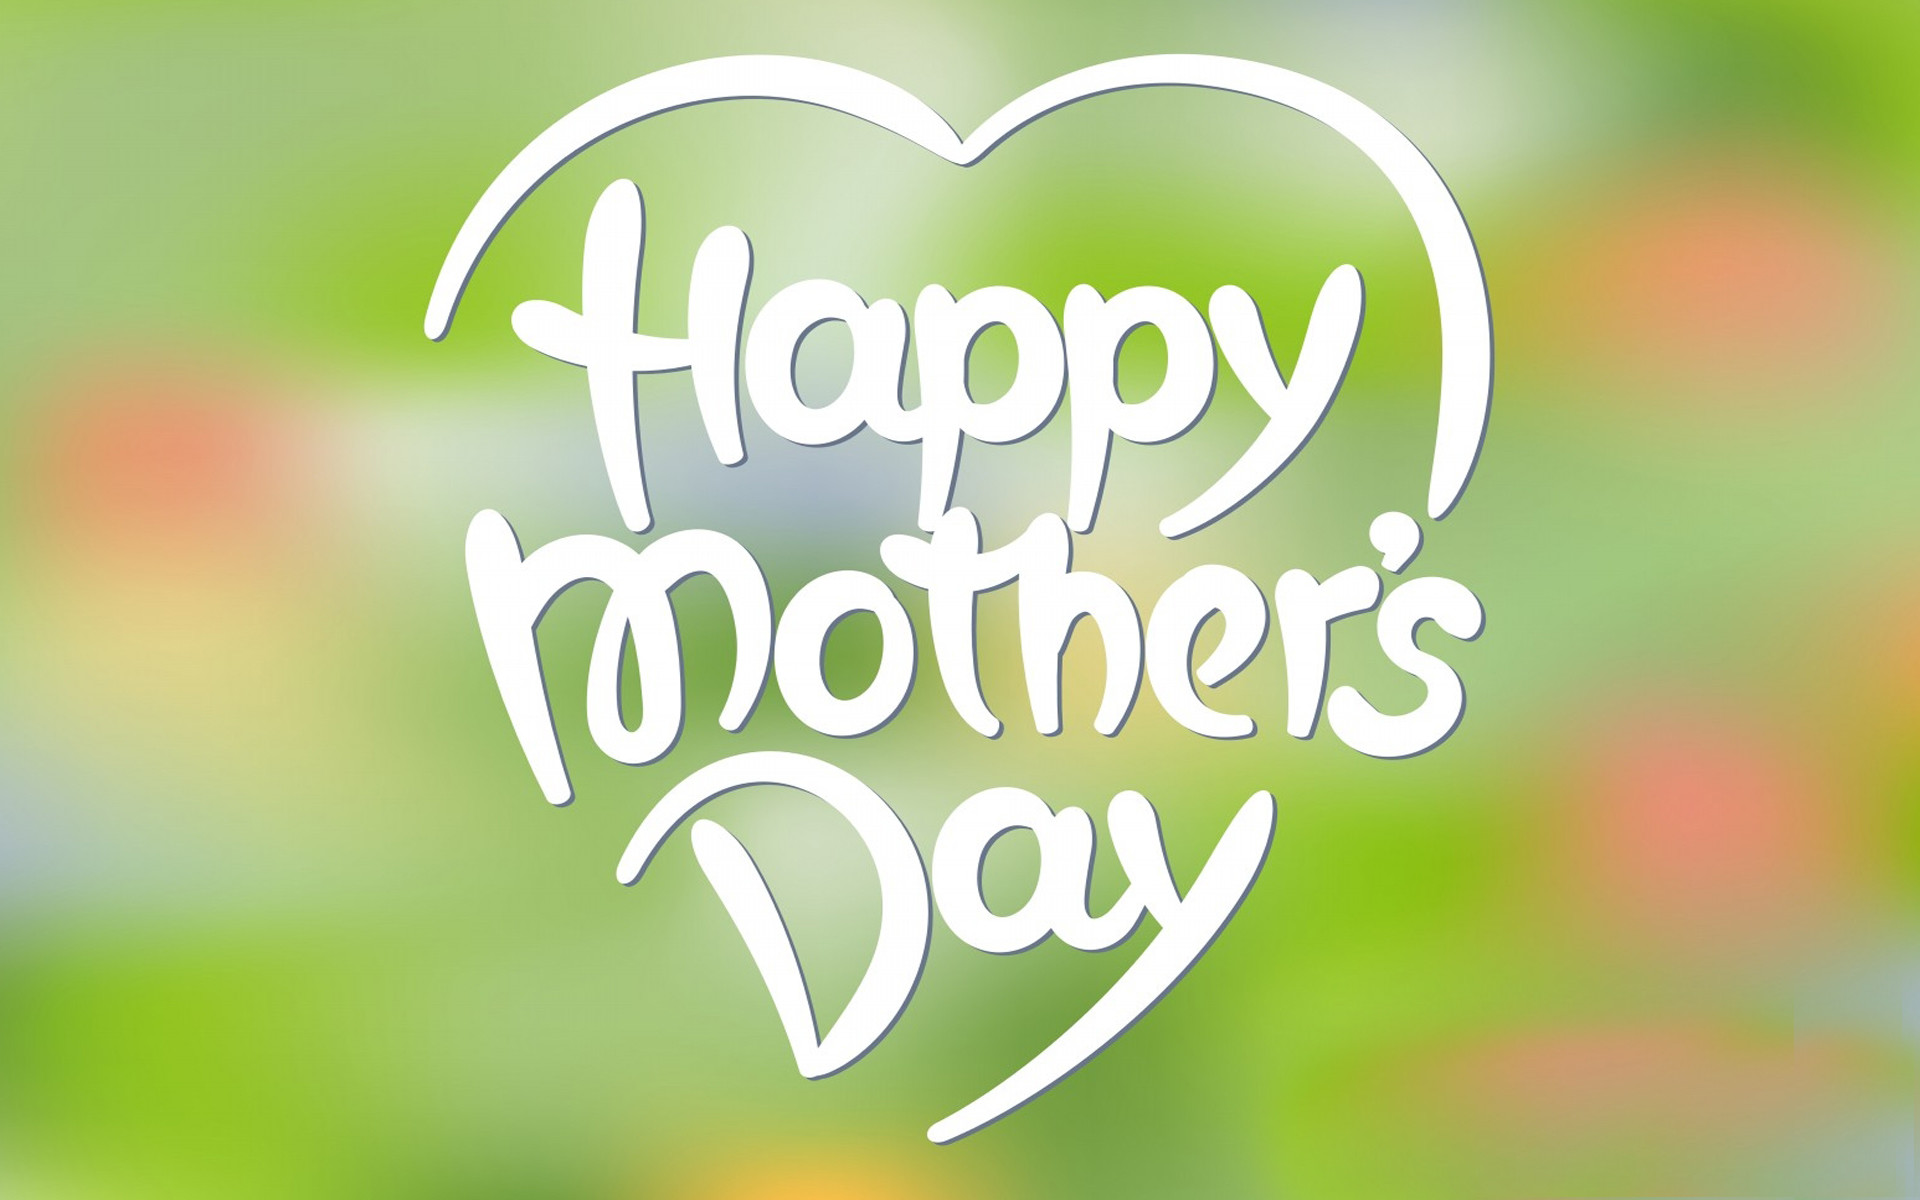 I Love You Mom Wallpaper Free Download - Happy Mothers Day Hd - 1920x1200  Wallpaper 